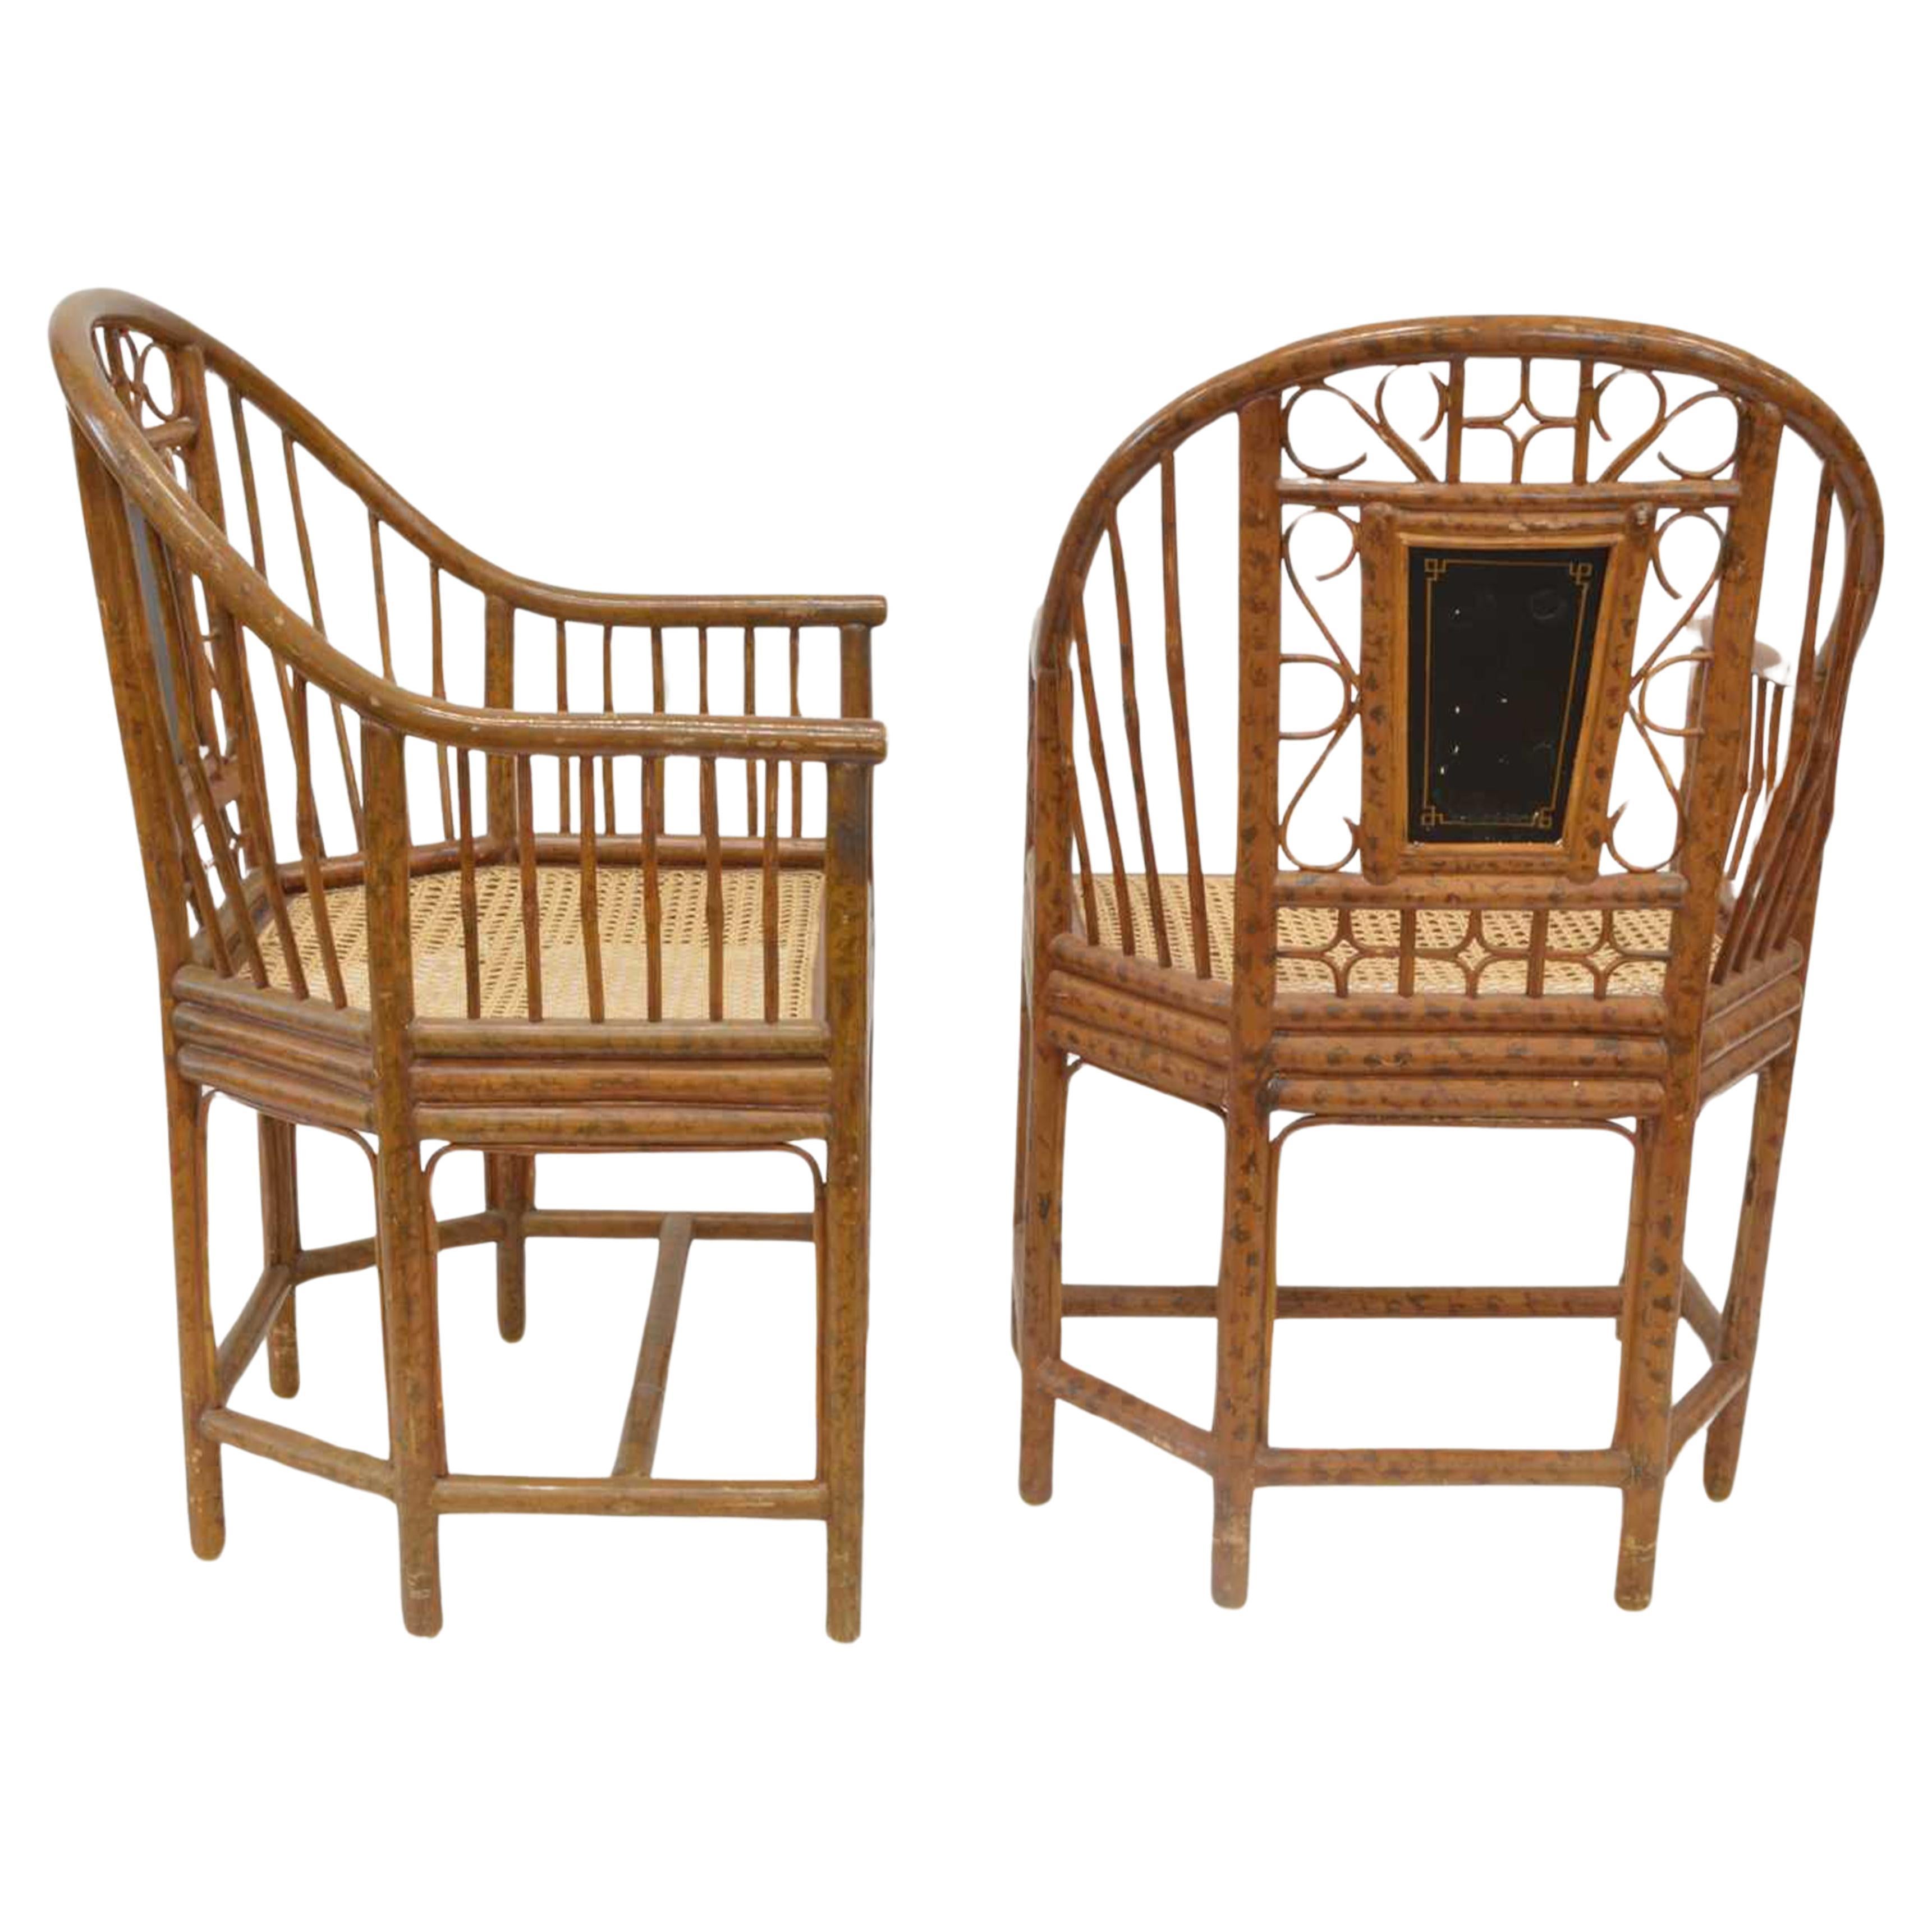 A Handmade Pair of Brighton Pavilion Chairs With Caned Seats & Painted Faux Burnt Bamboo Finished Frame.

Each seat rears features Chinoiserie figures painted gilt panels.
Painted panel over a shaped caned seat, raised on six legs united by